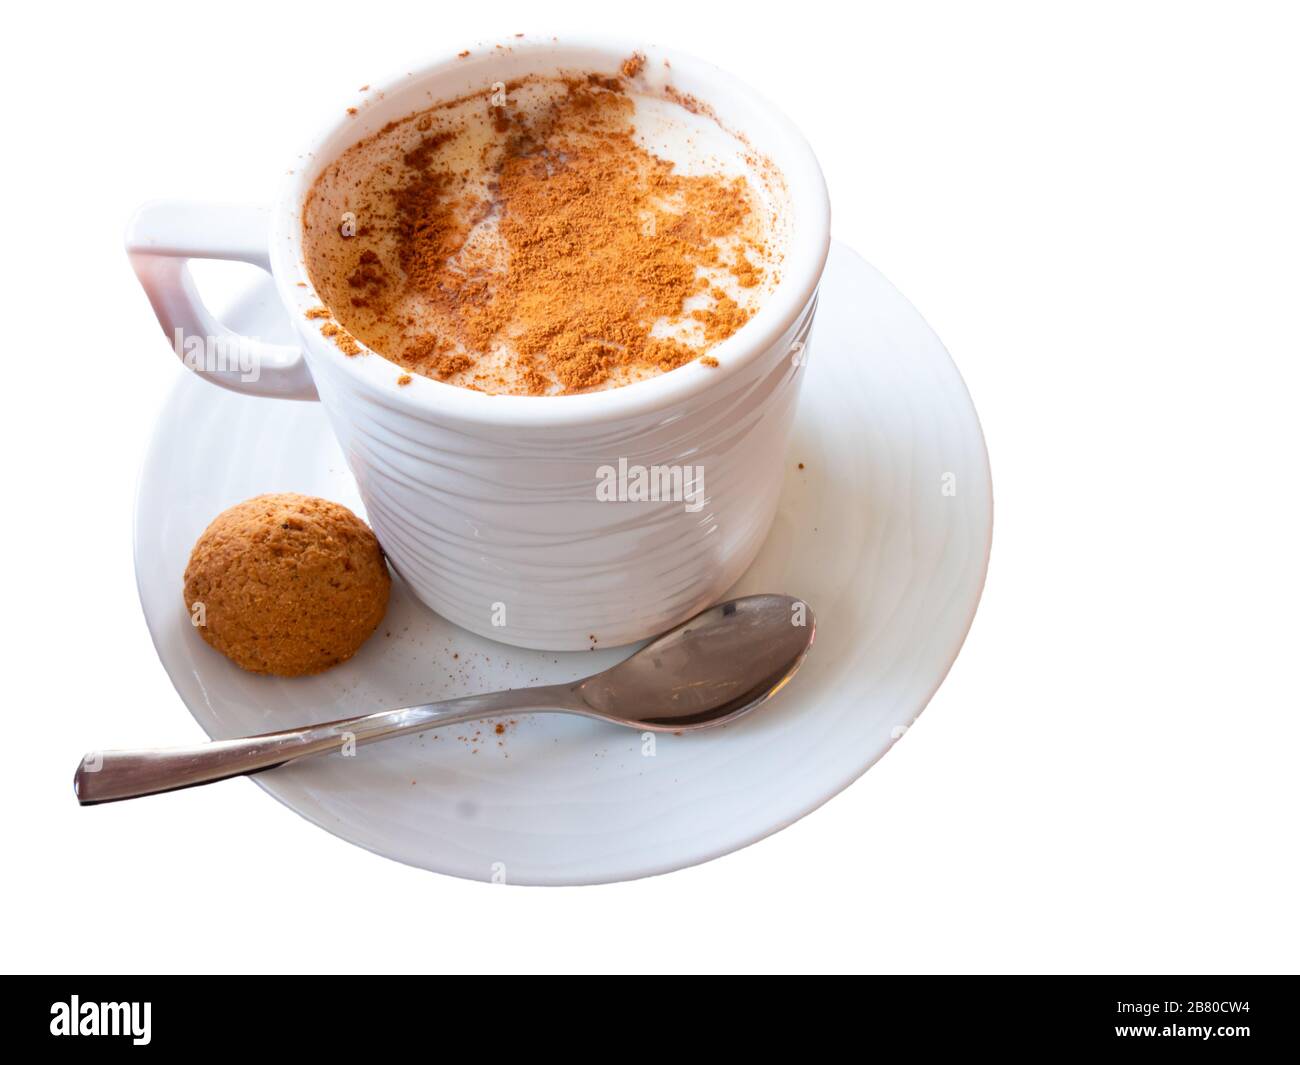 File:Salep on a wooden table.jpg - Wikimedia Commons